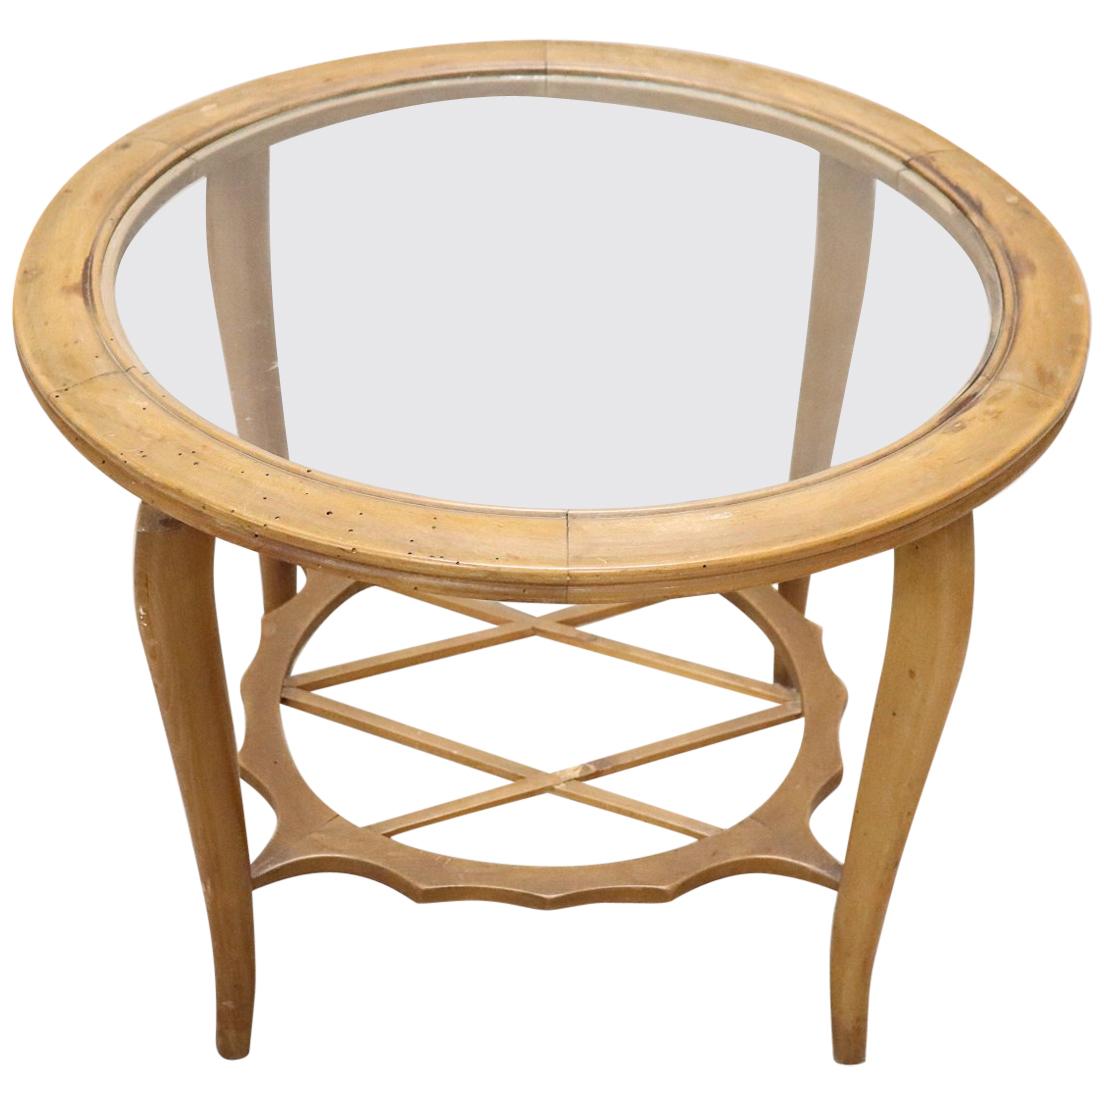 20th Century Italian Design Coffee Table in the Style of Paolo Buffa, 1940s